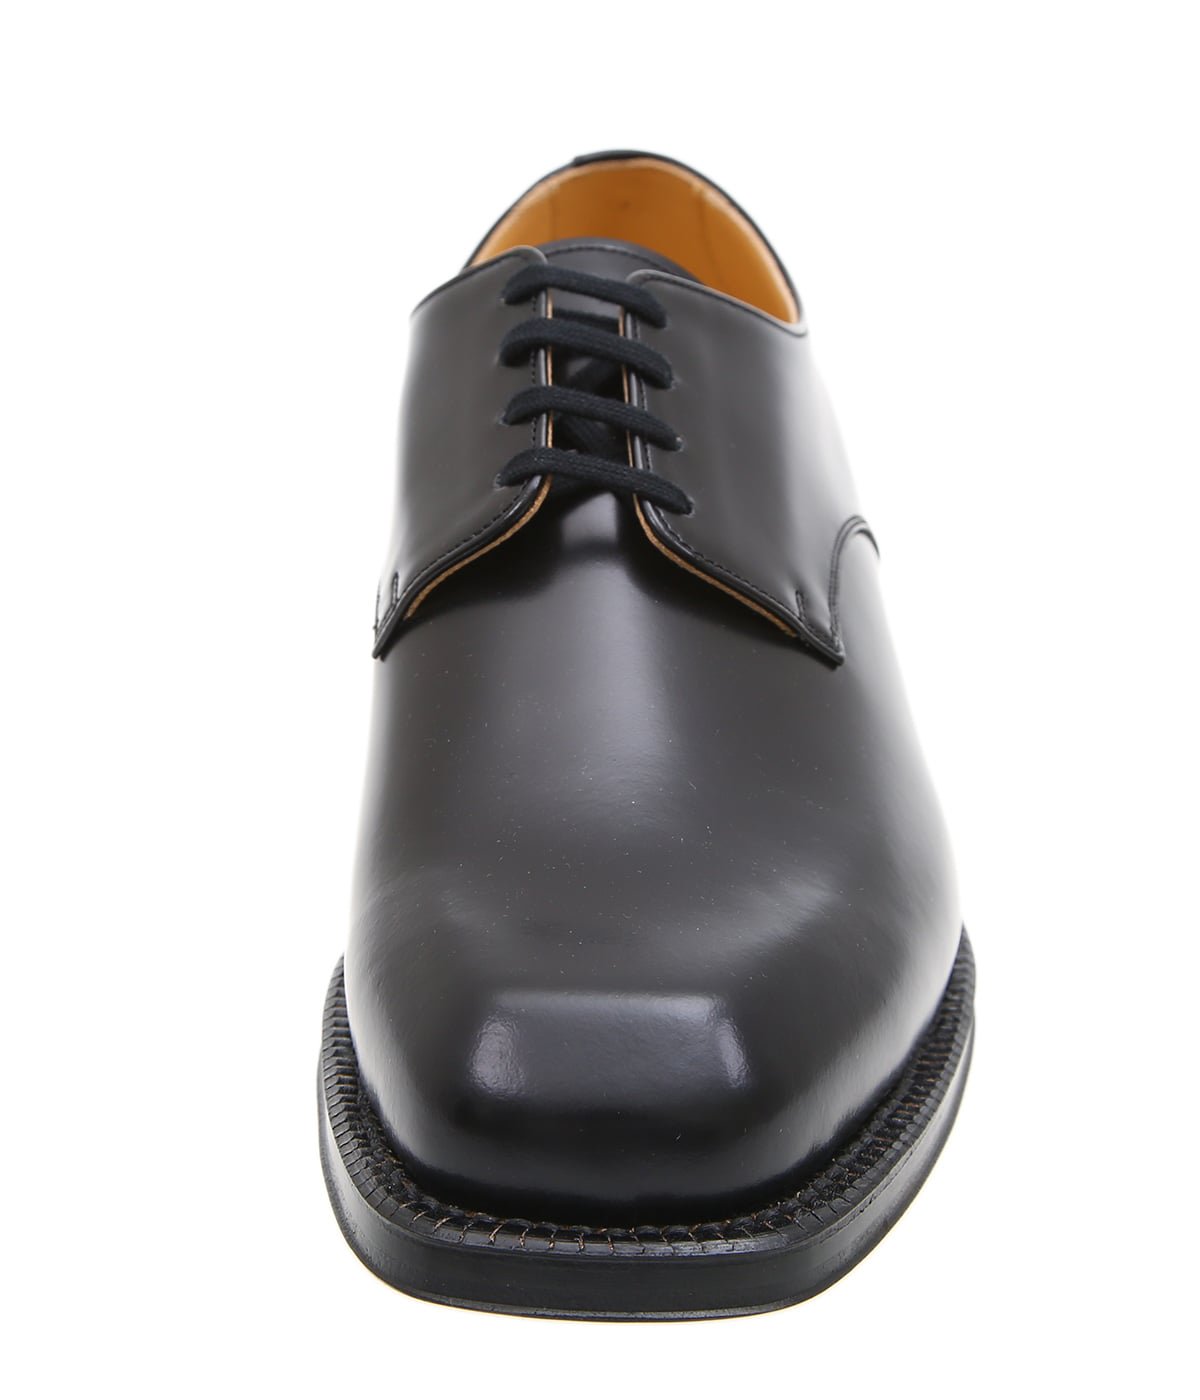 LEATHER SHOES MADE BY FOOT THE COACHER